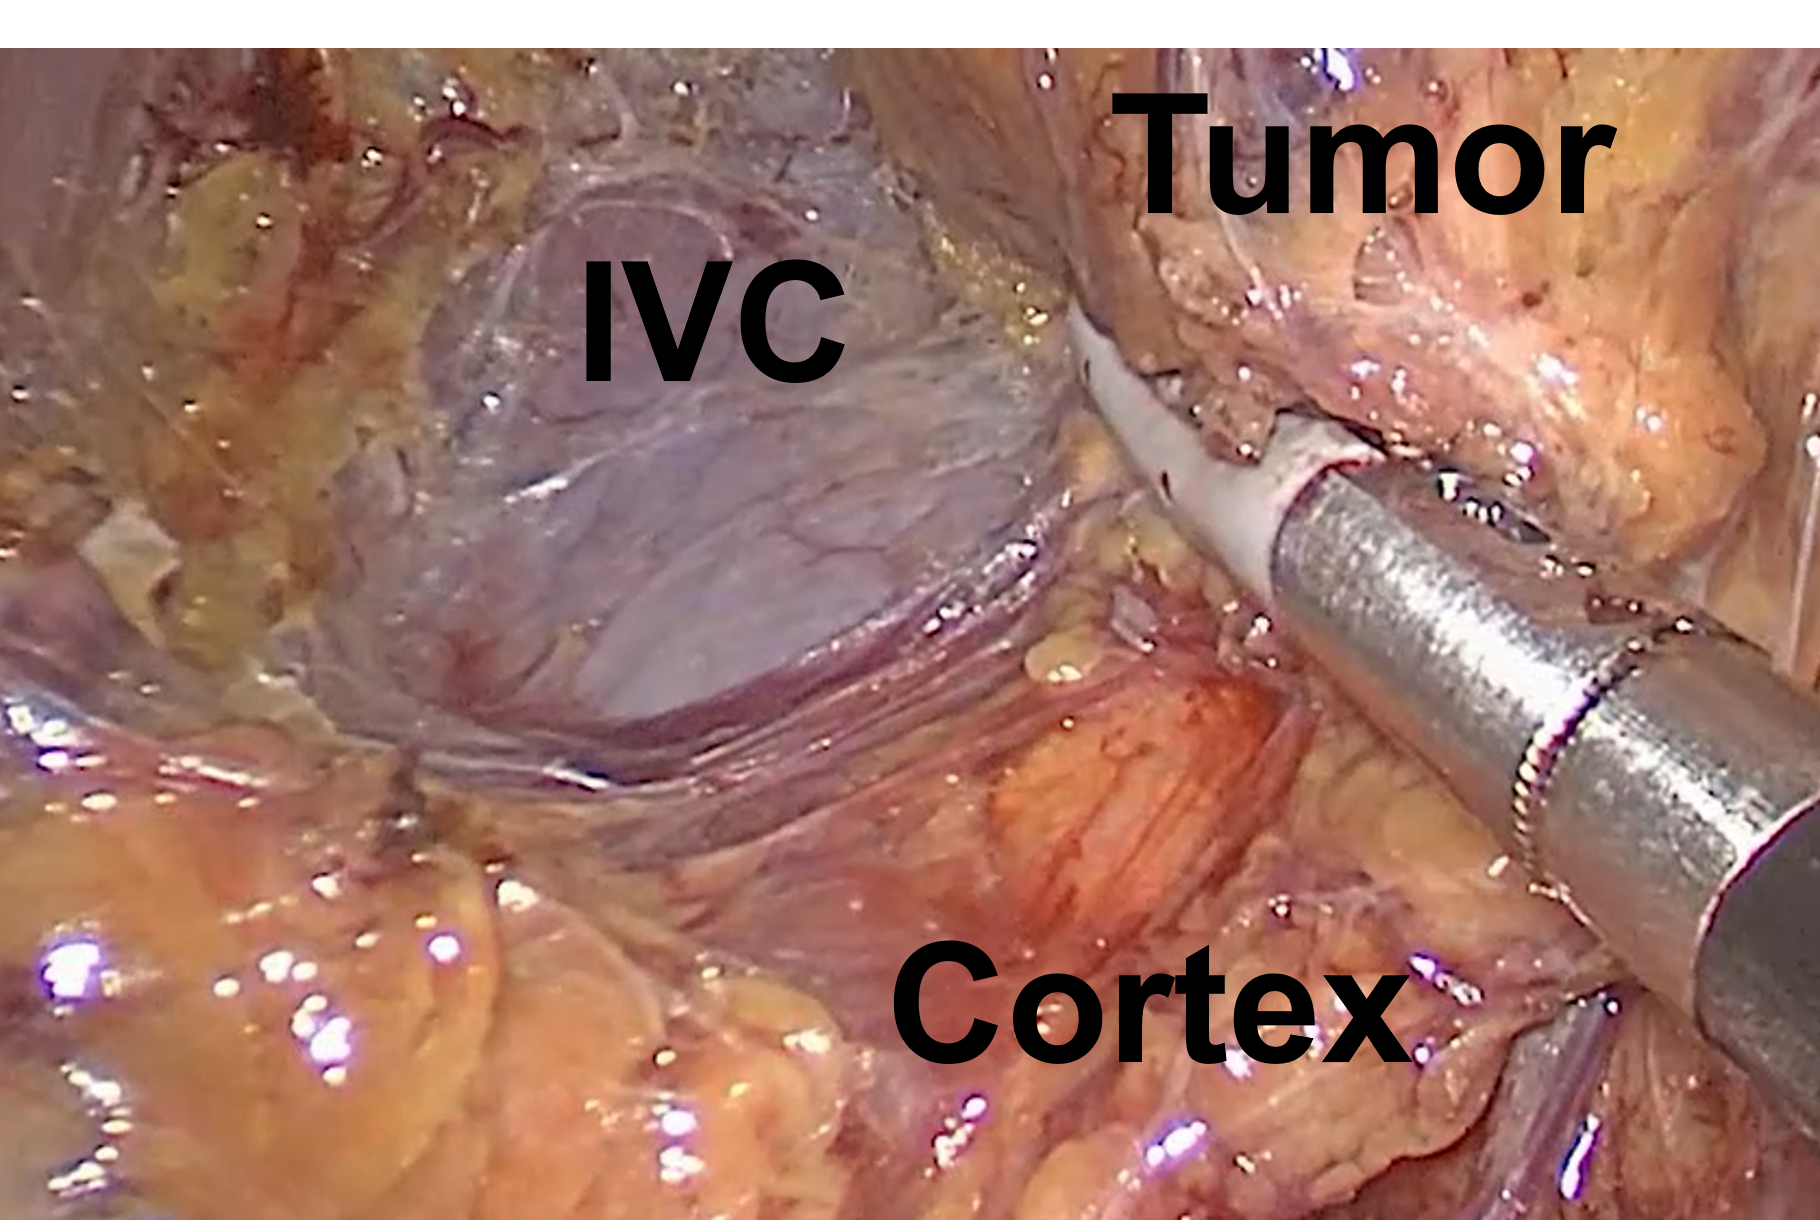 Dissection of the inferior vena cava (IVC), normal adrenal cortex, and the adrenal tumor during a right Mini Back Scope Adrenalectomy (MBSA).